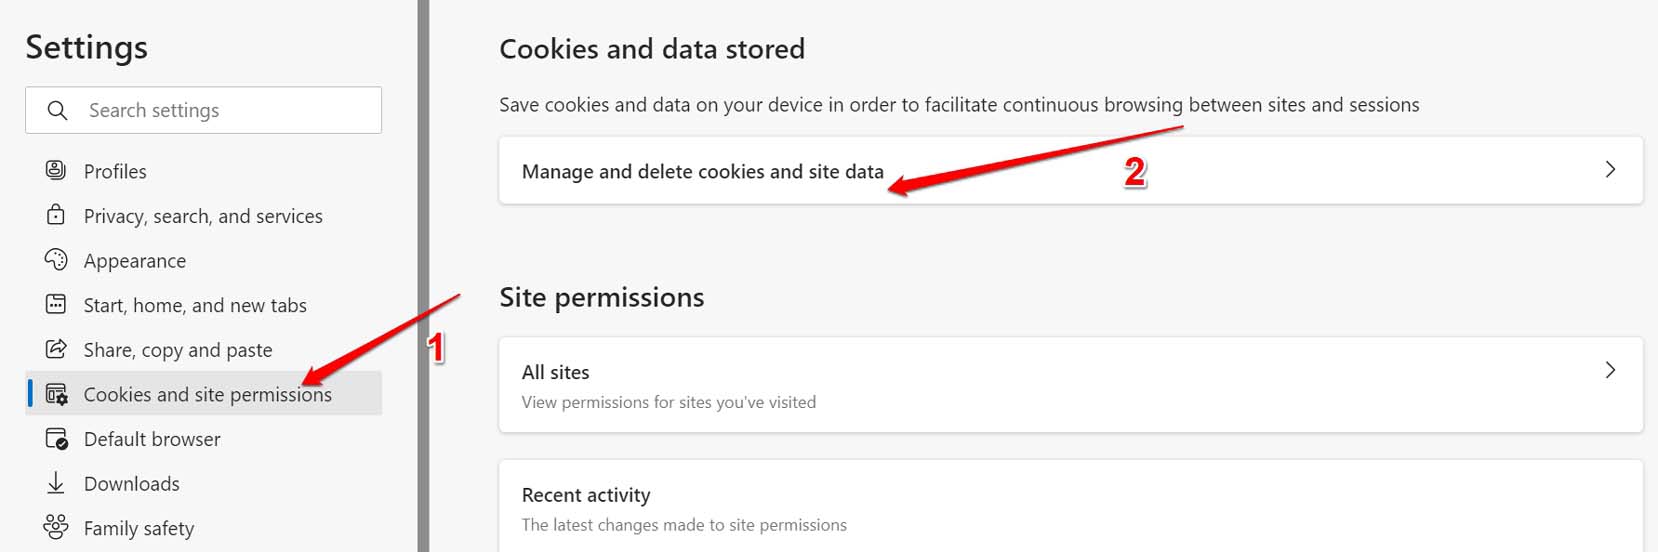 manage and delete cookies on Edge browser